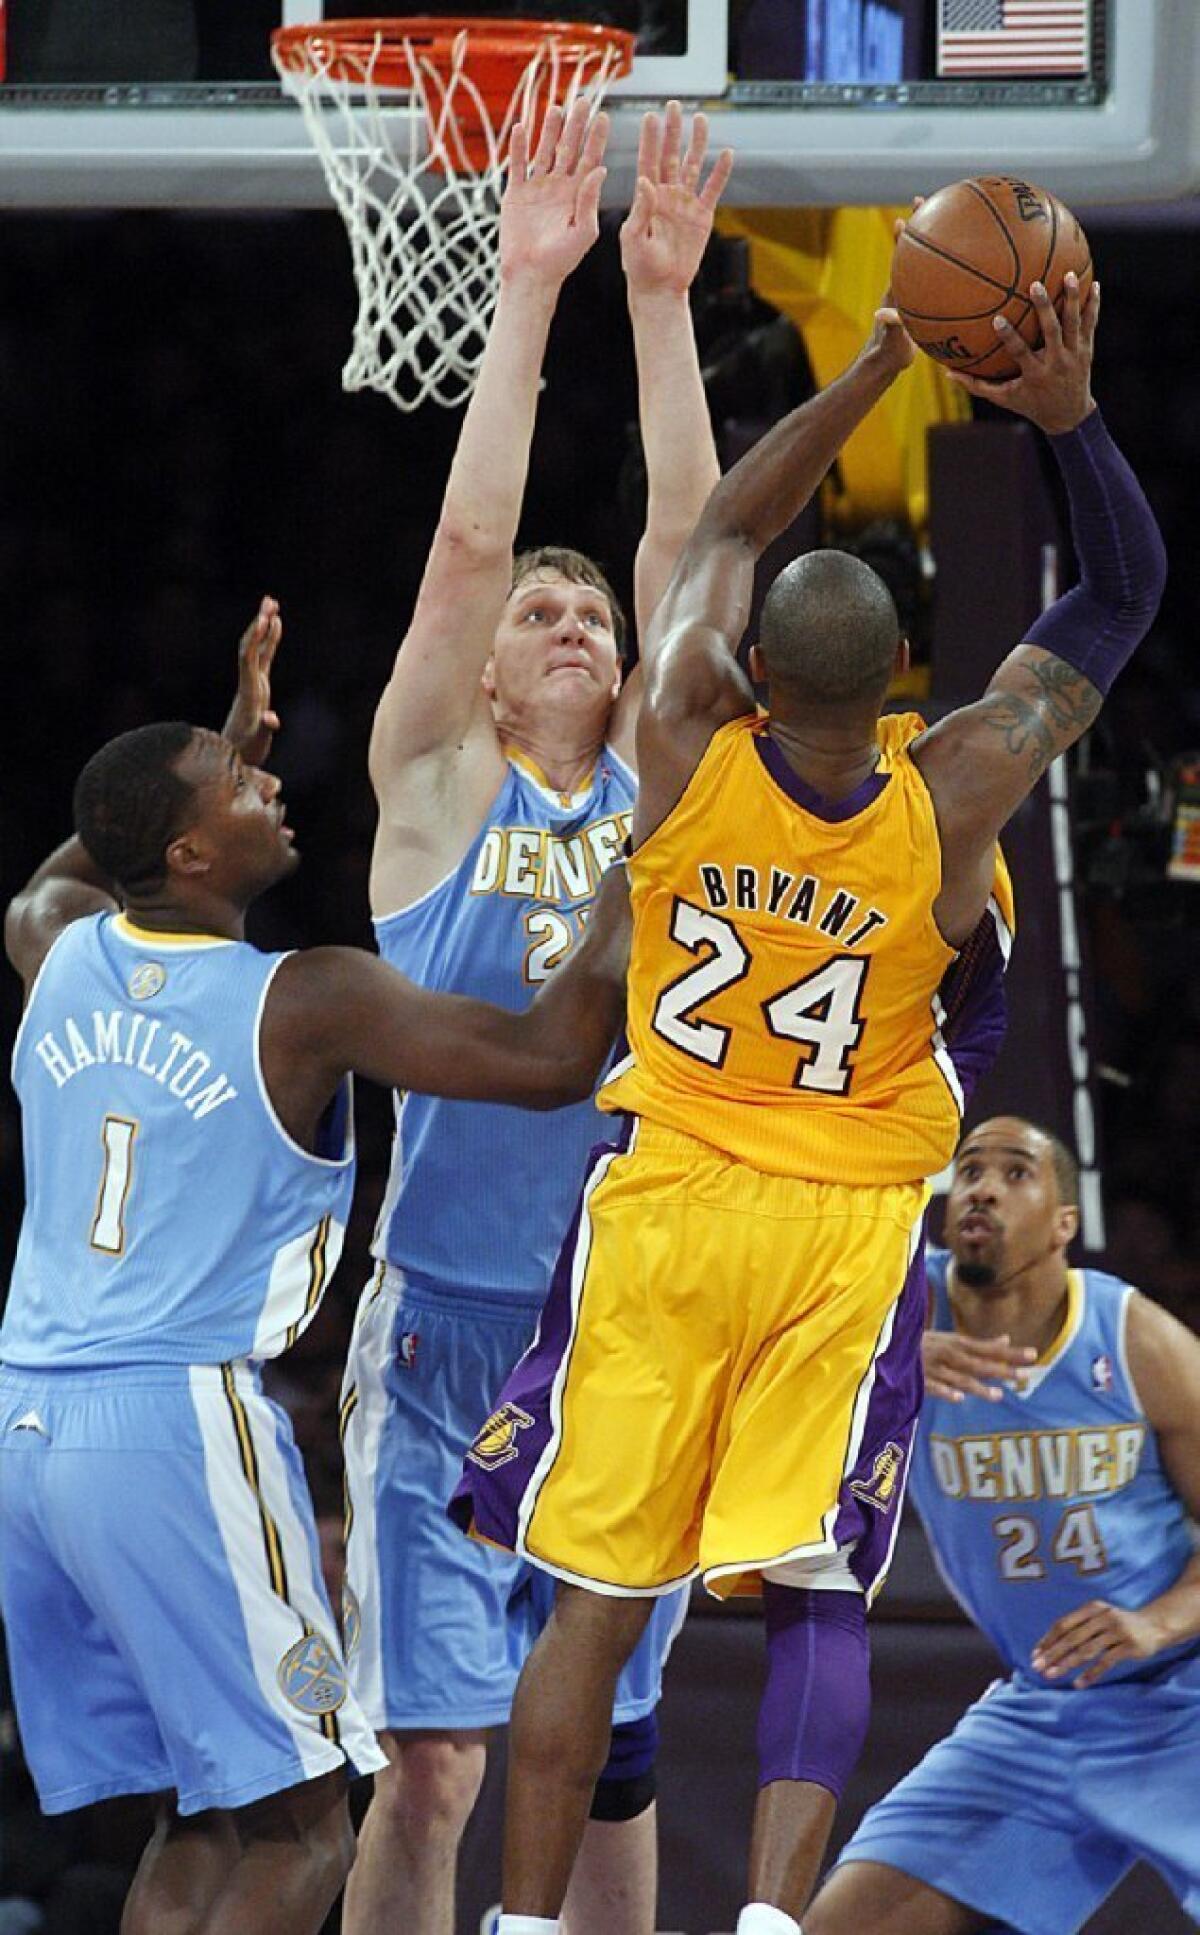 Lakers guard Kobe Bryant goes strong to the basket against Nuggets defenders Jordan Hamilton, left, Timofey Mozgov and Andre Miller in the fourth quarter on Friday.